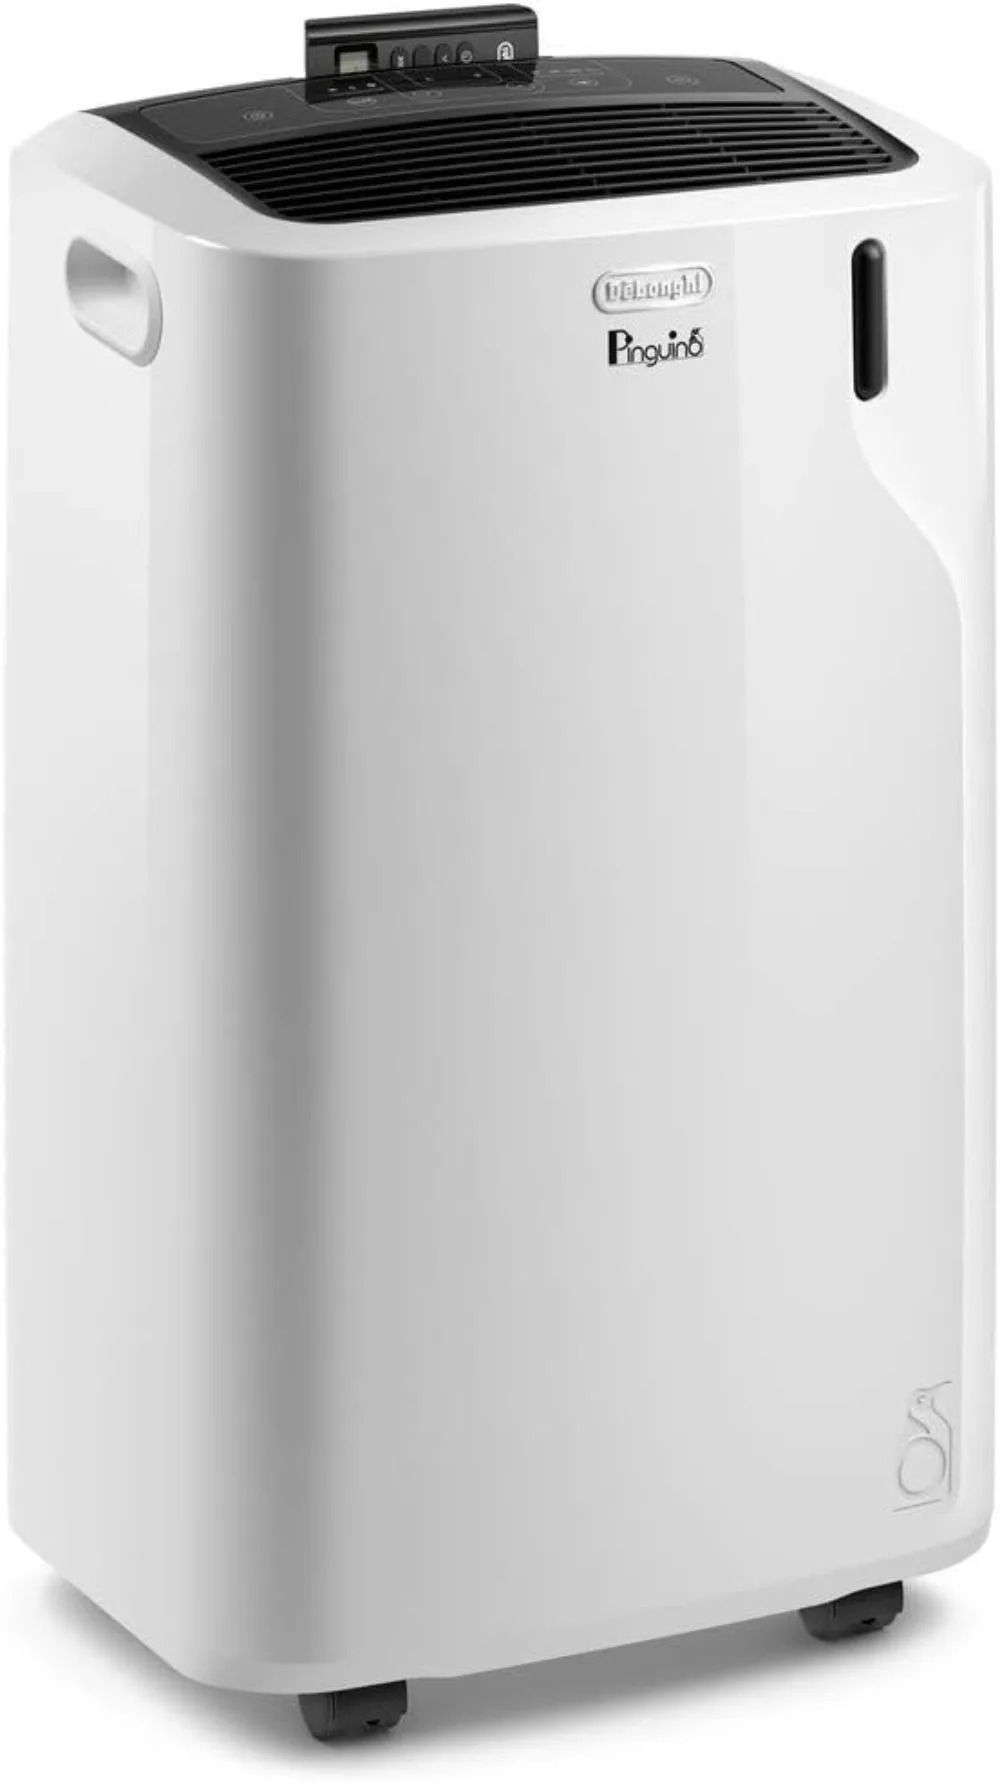 

America PACEM370 WH DeLonghi Pinguino Portable Air Conditioner in White, 6700.0 BTU Cooling Power, Eco-Friendly and Portable